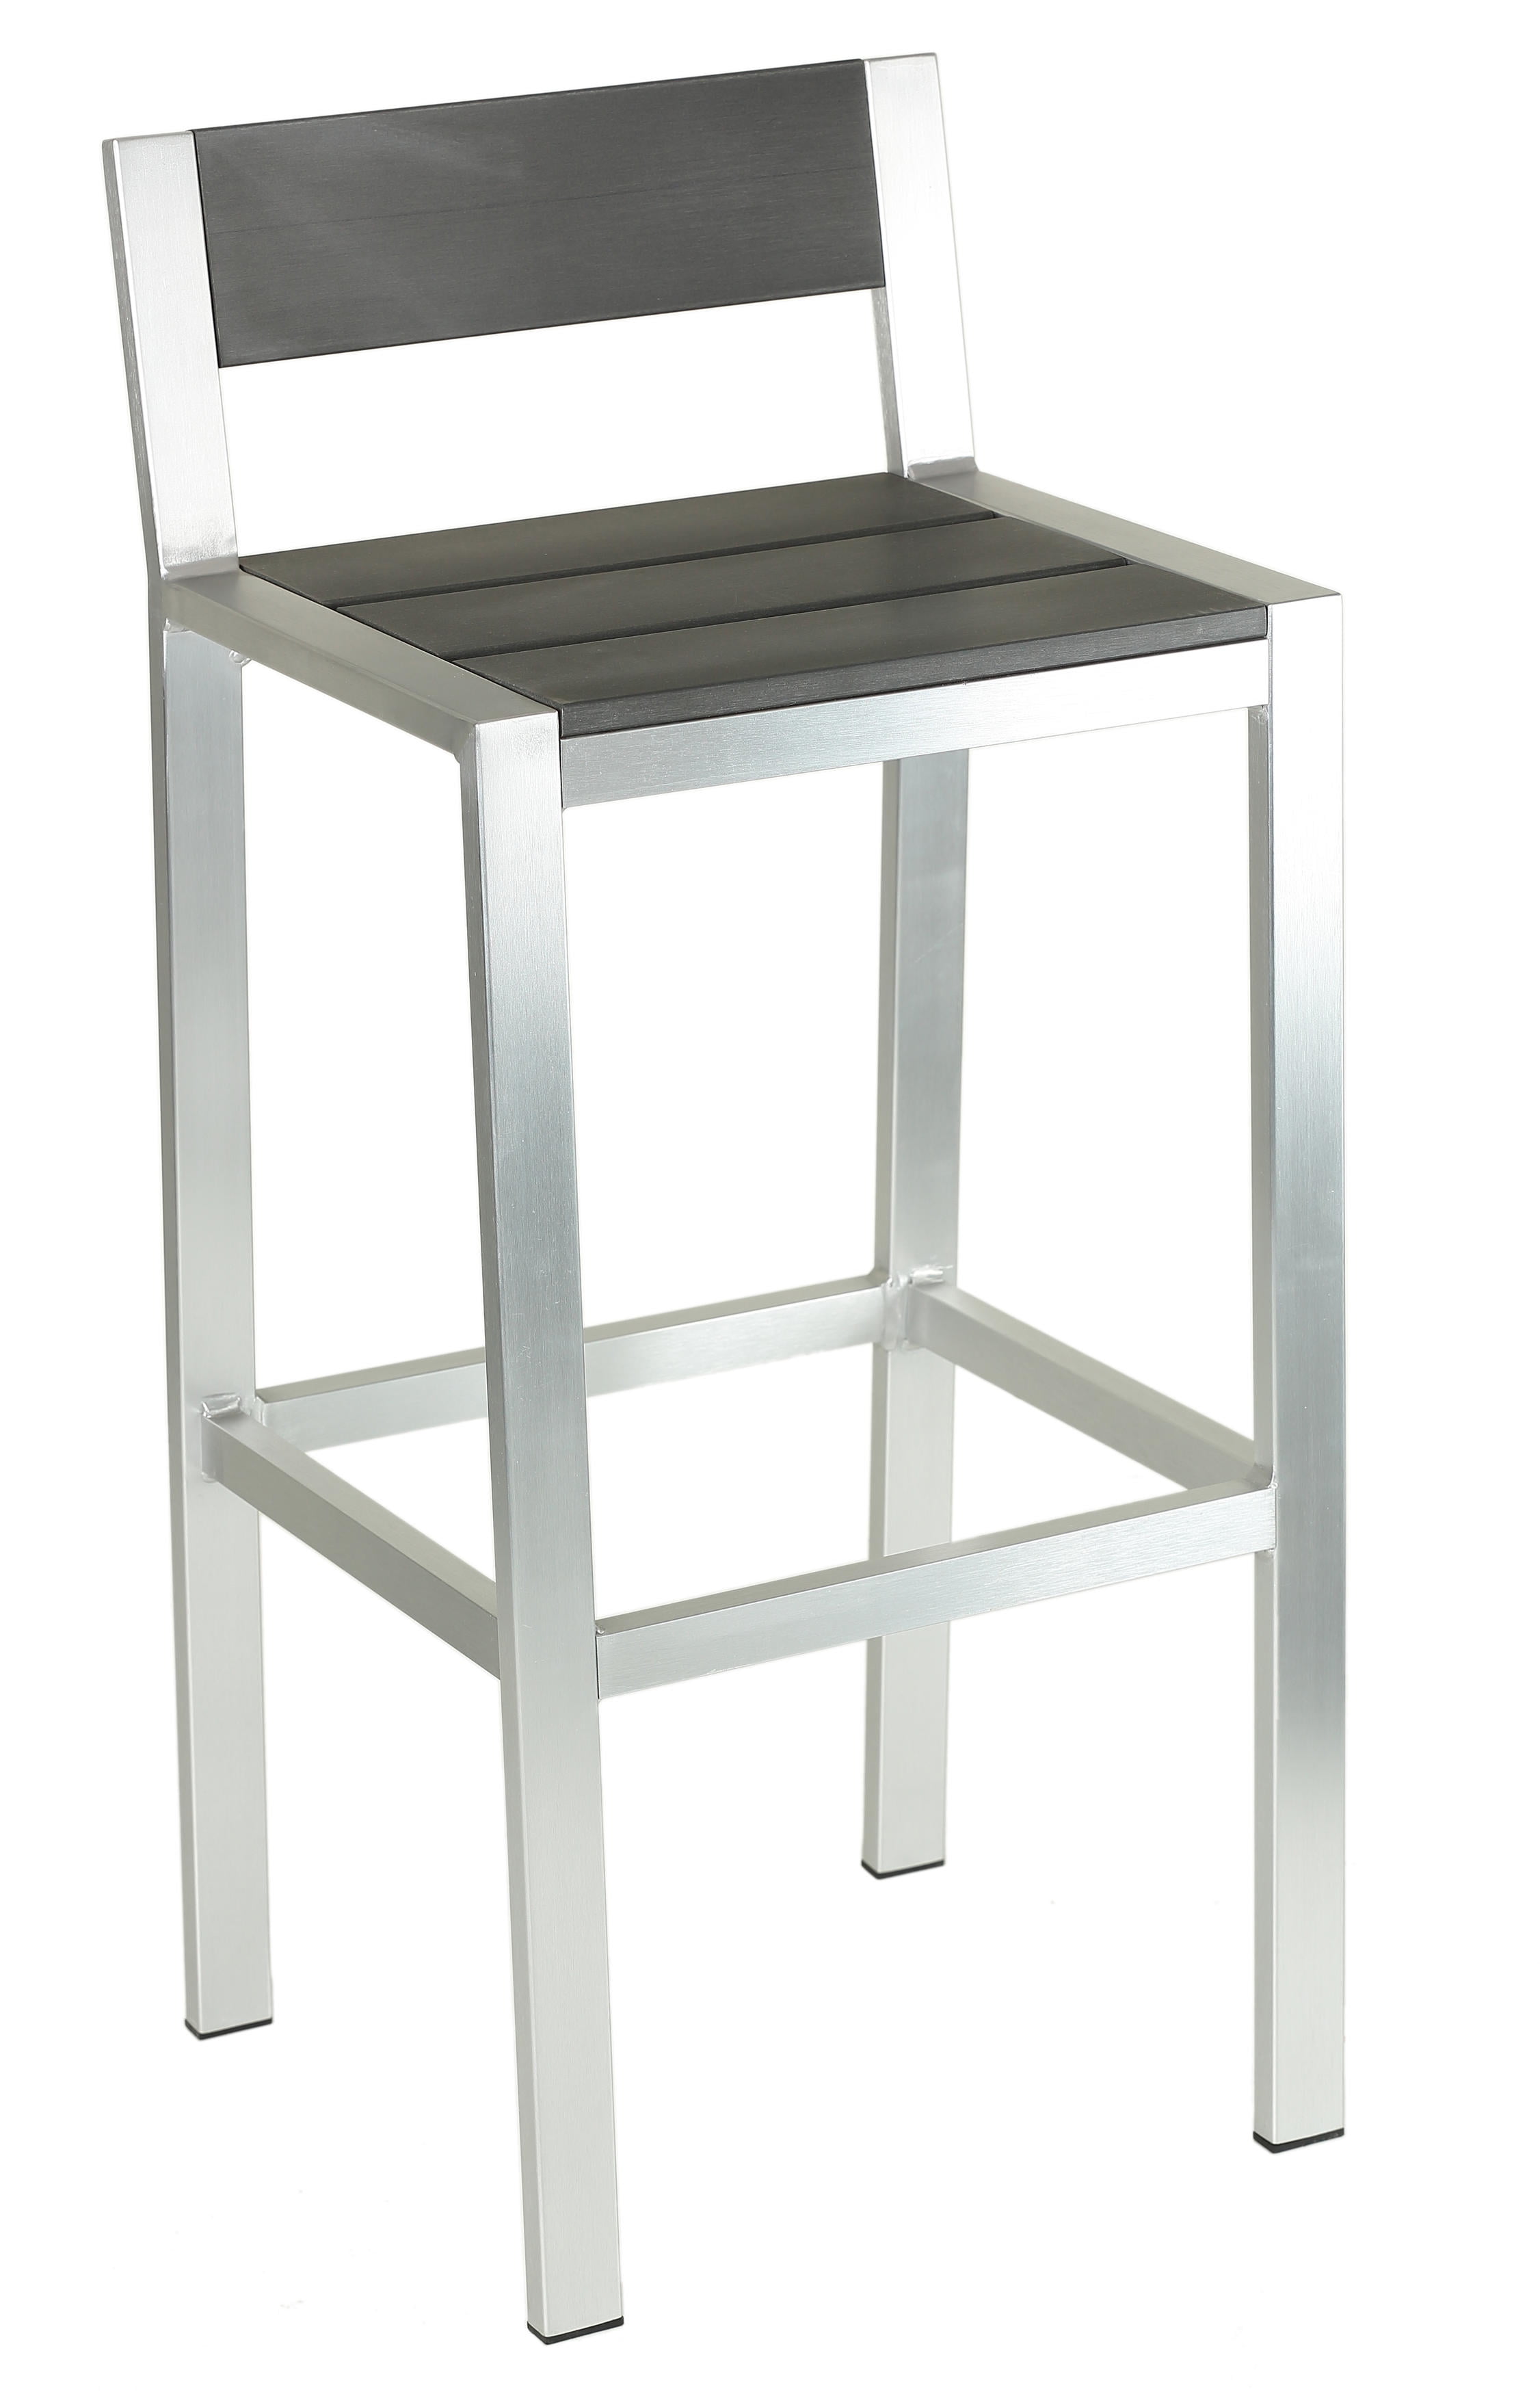 Haven Aluminum Outdoor Barstool In, Outdoor Aluminum Bar Stools With Backs